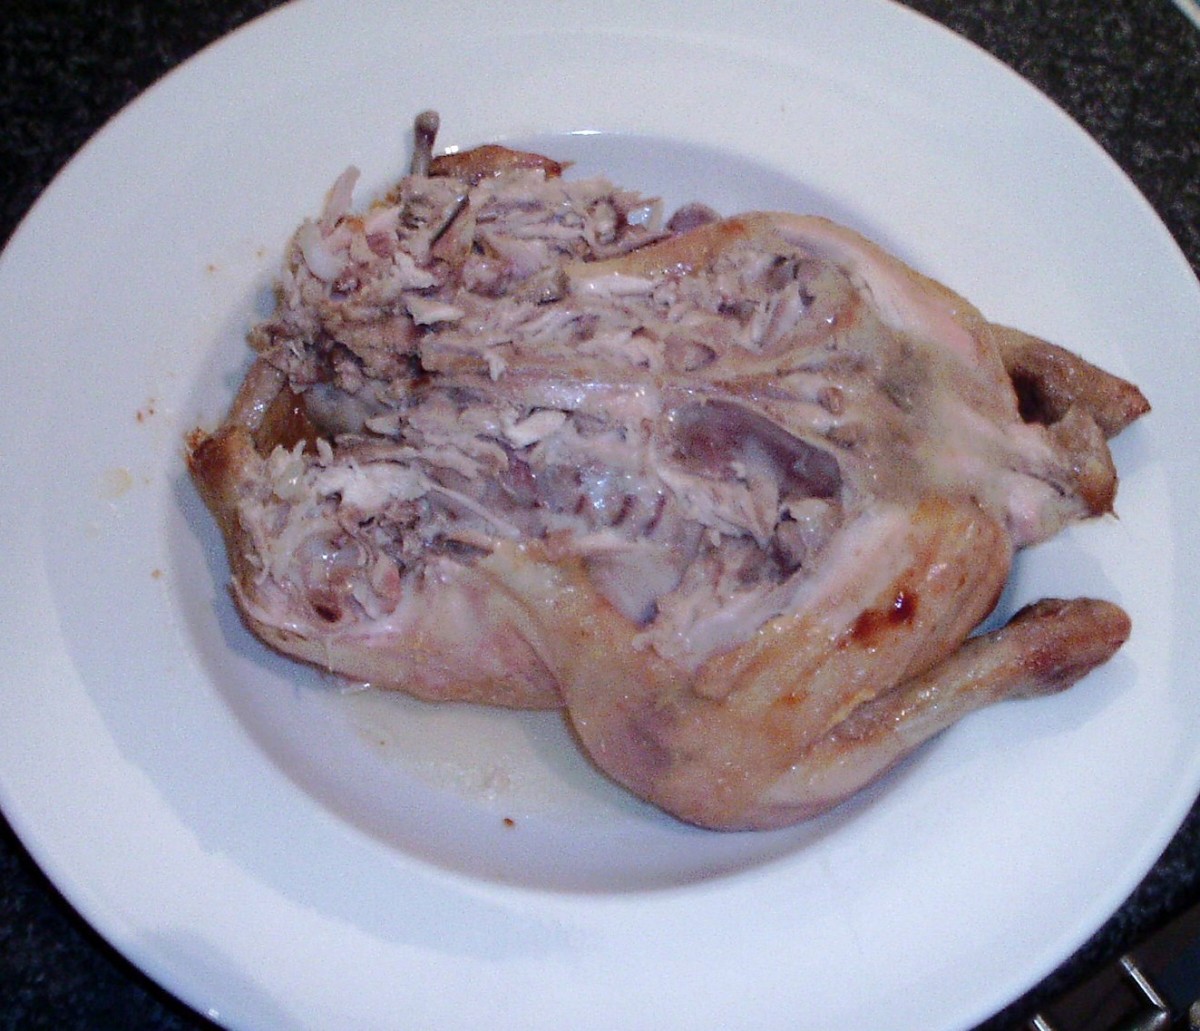 Meat is plucked from the back of the rested roast chicken